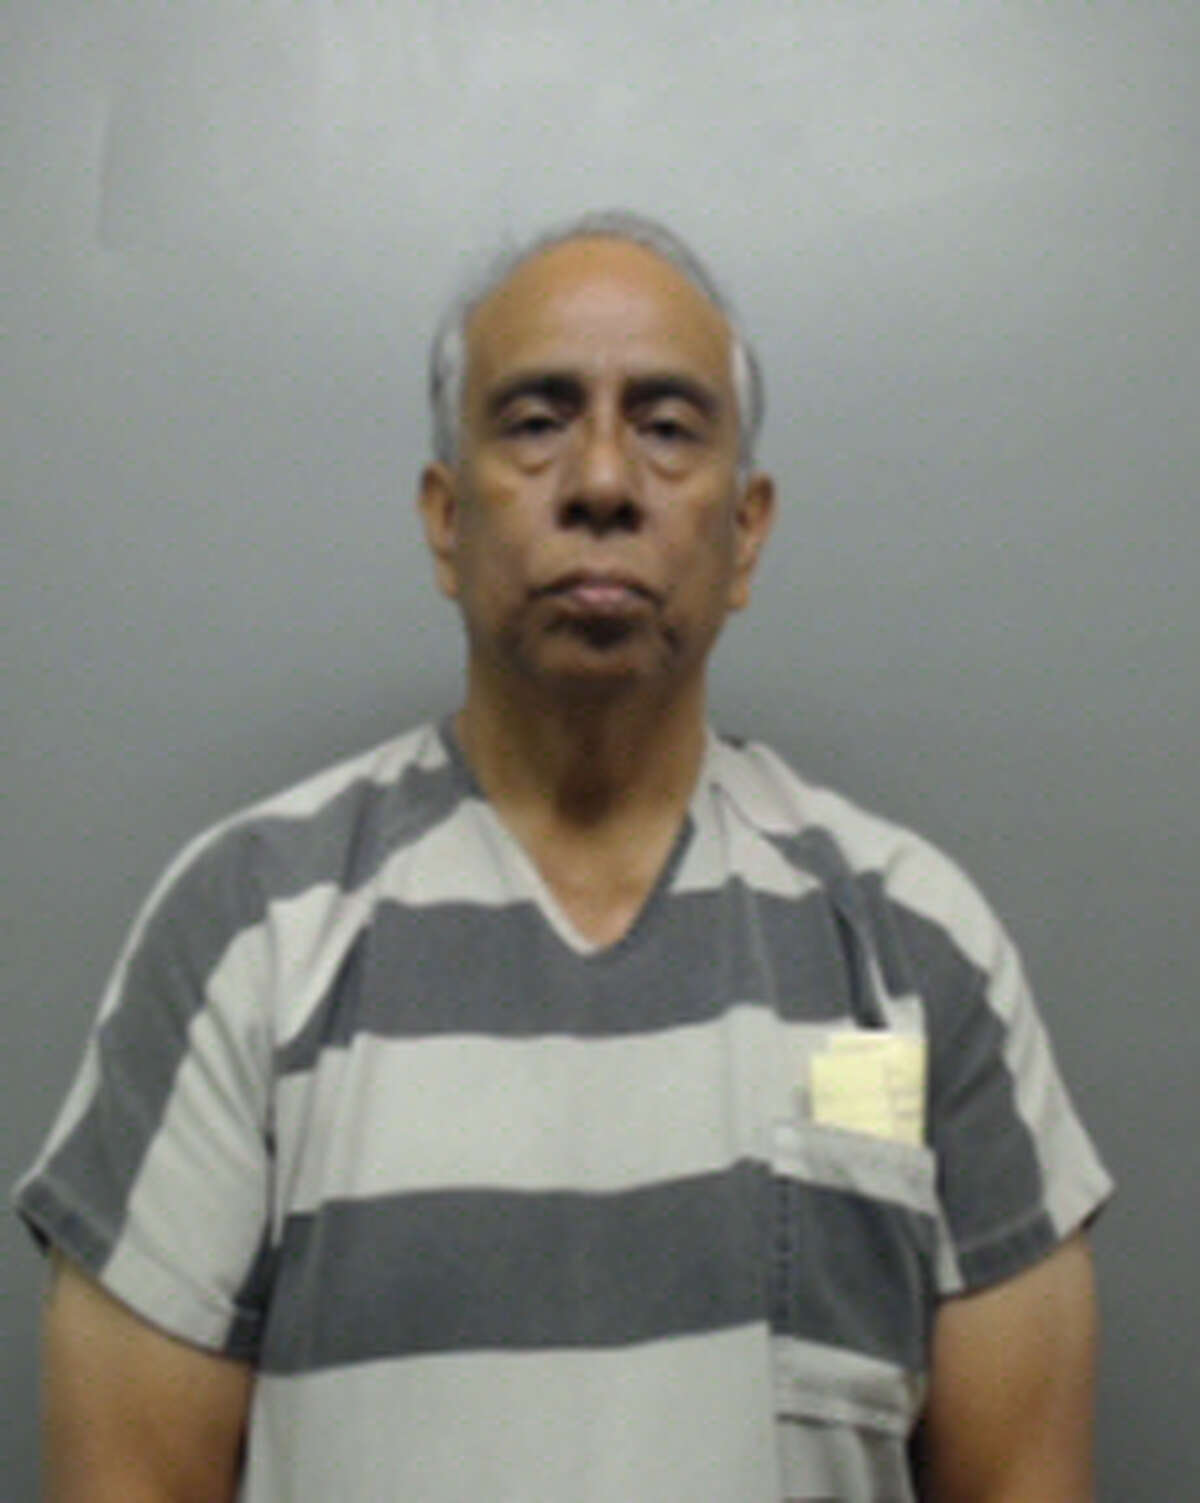 Antonio Salinas, 63, was arrested on possession of child pornography charges.